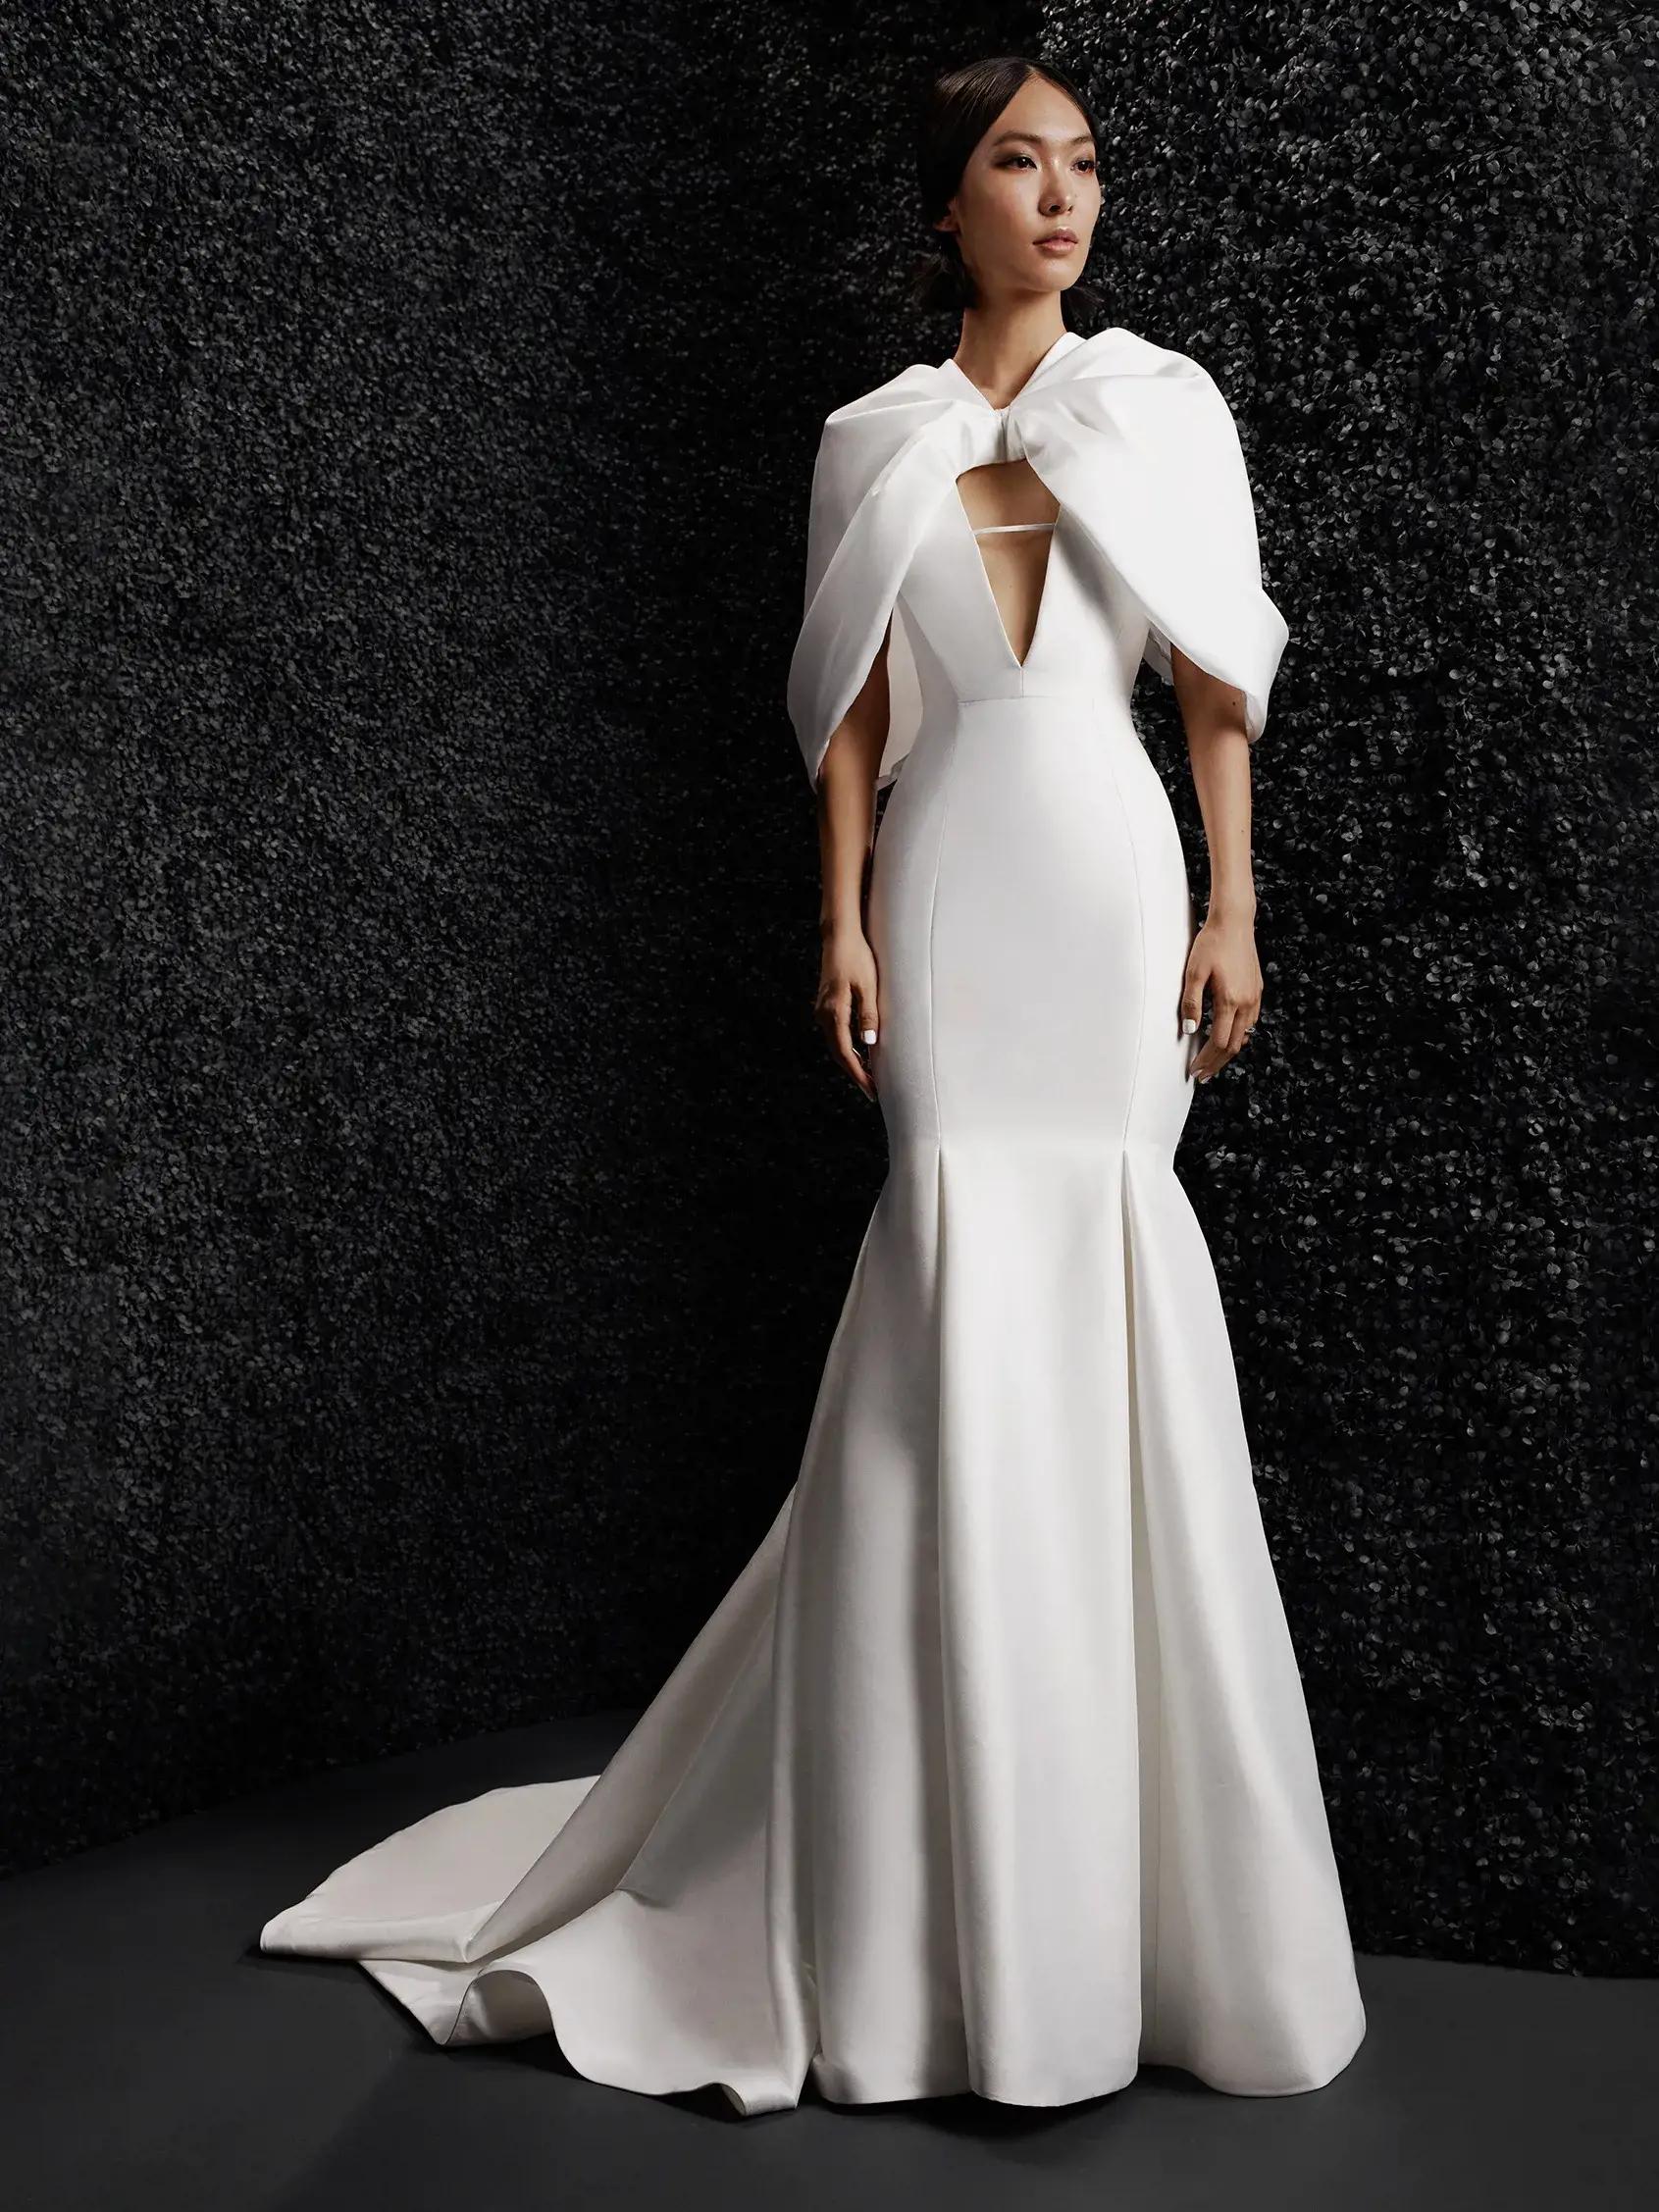 Photo of Model wearing a Vera Wang bridal gown